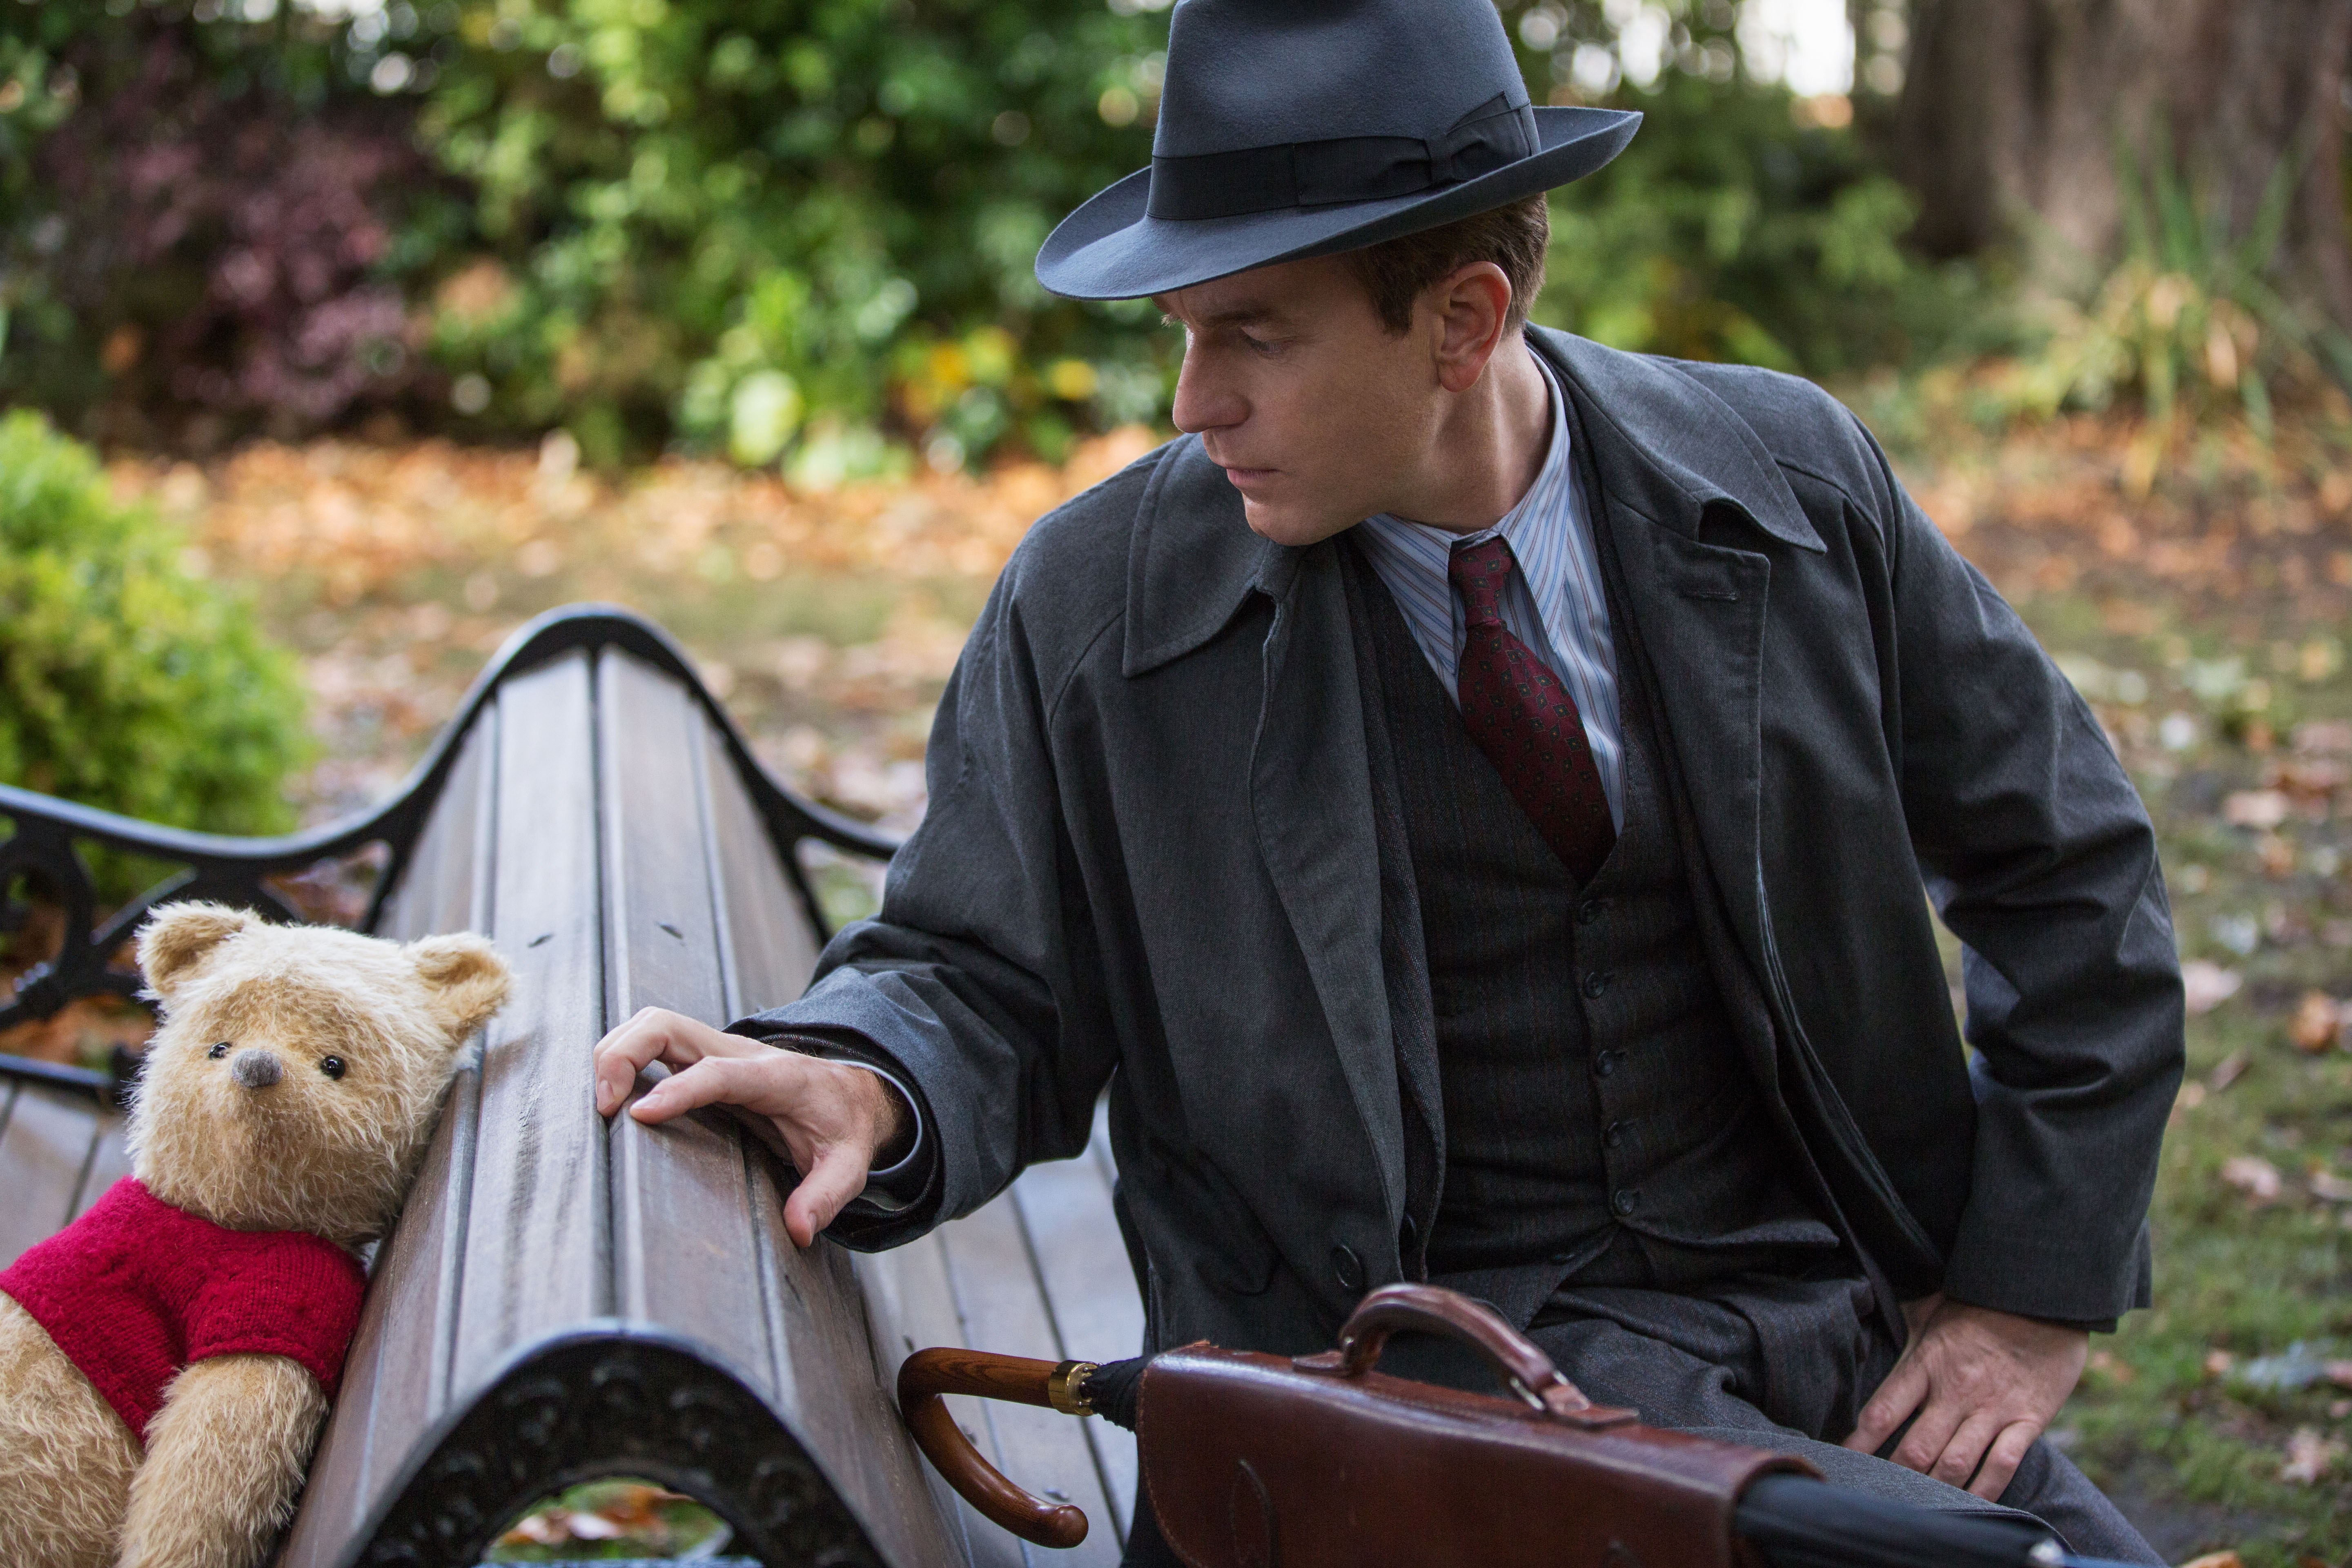 Cinemadope: Christopher Robin explores what stays with us from childhood